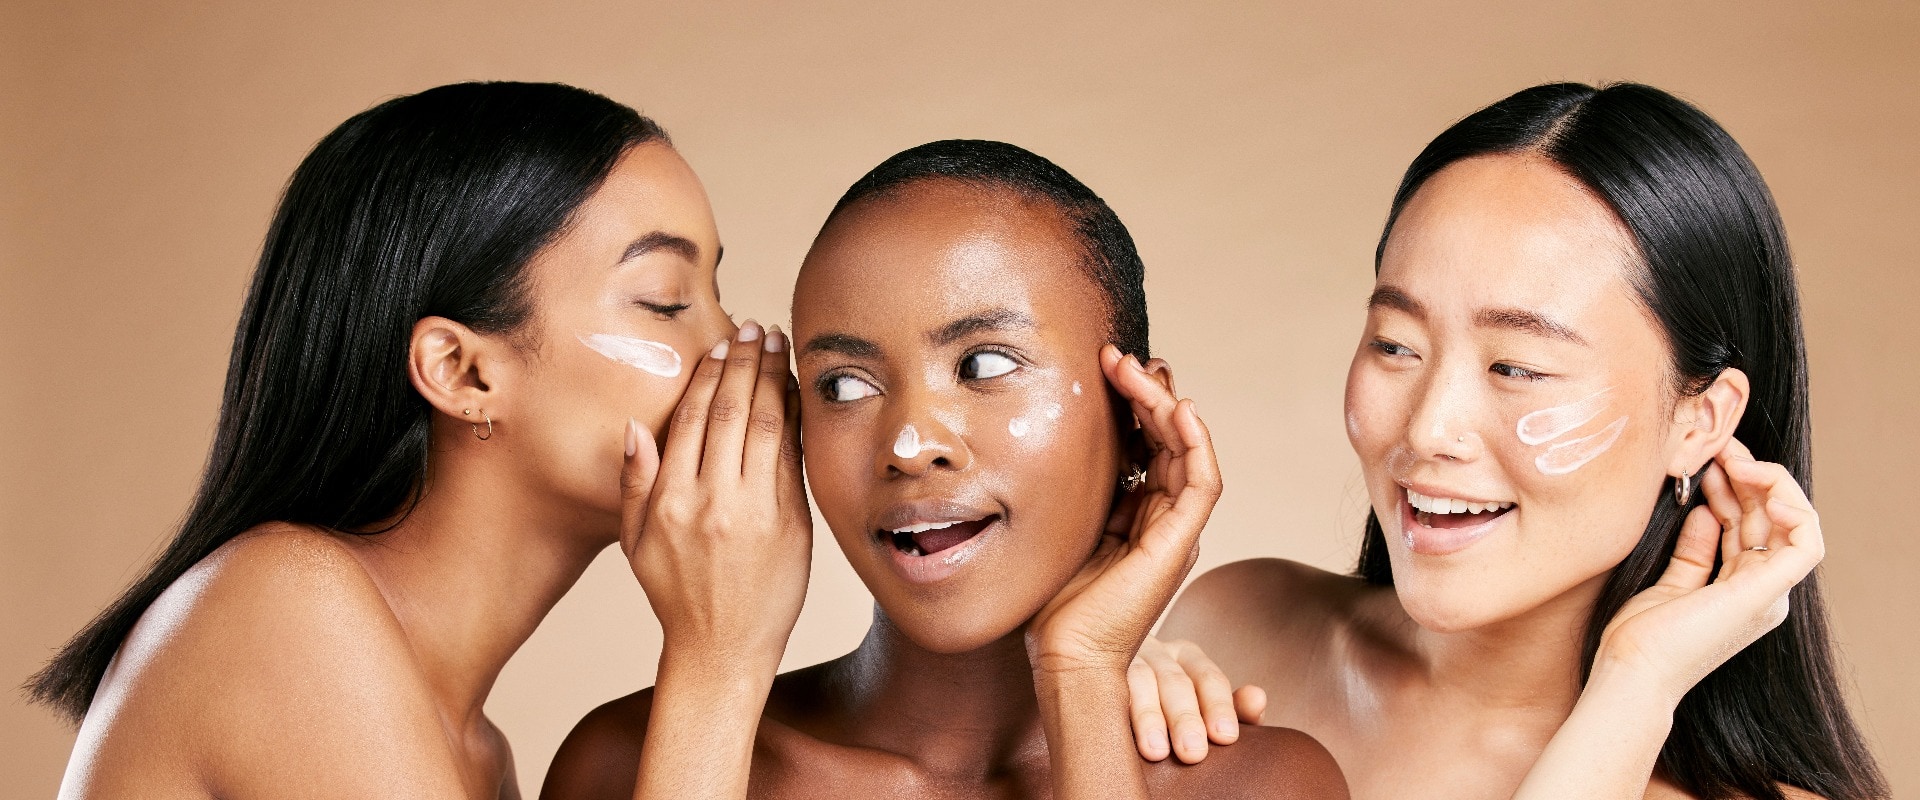 Beauty secret, skincare cream and diversity women friends whisper about inclusion advertising in studio. Asian and black people talk about wow skin glow, spa facial and face with dermatology product